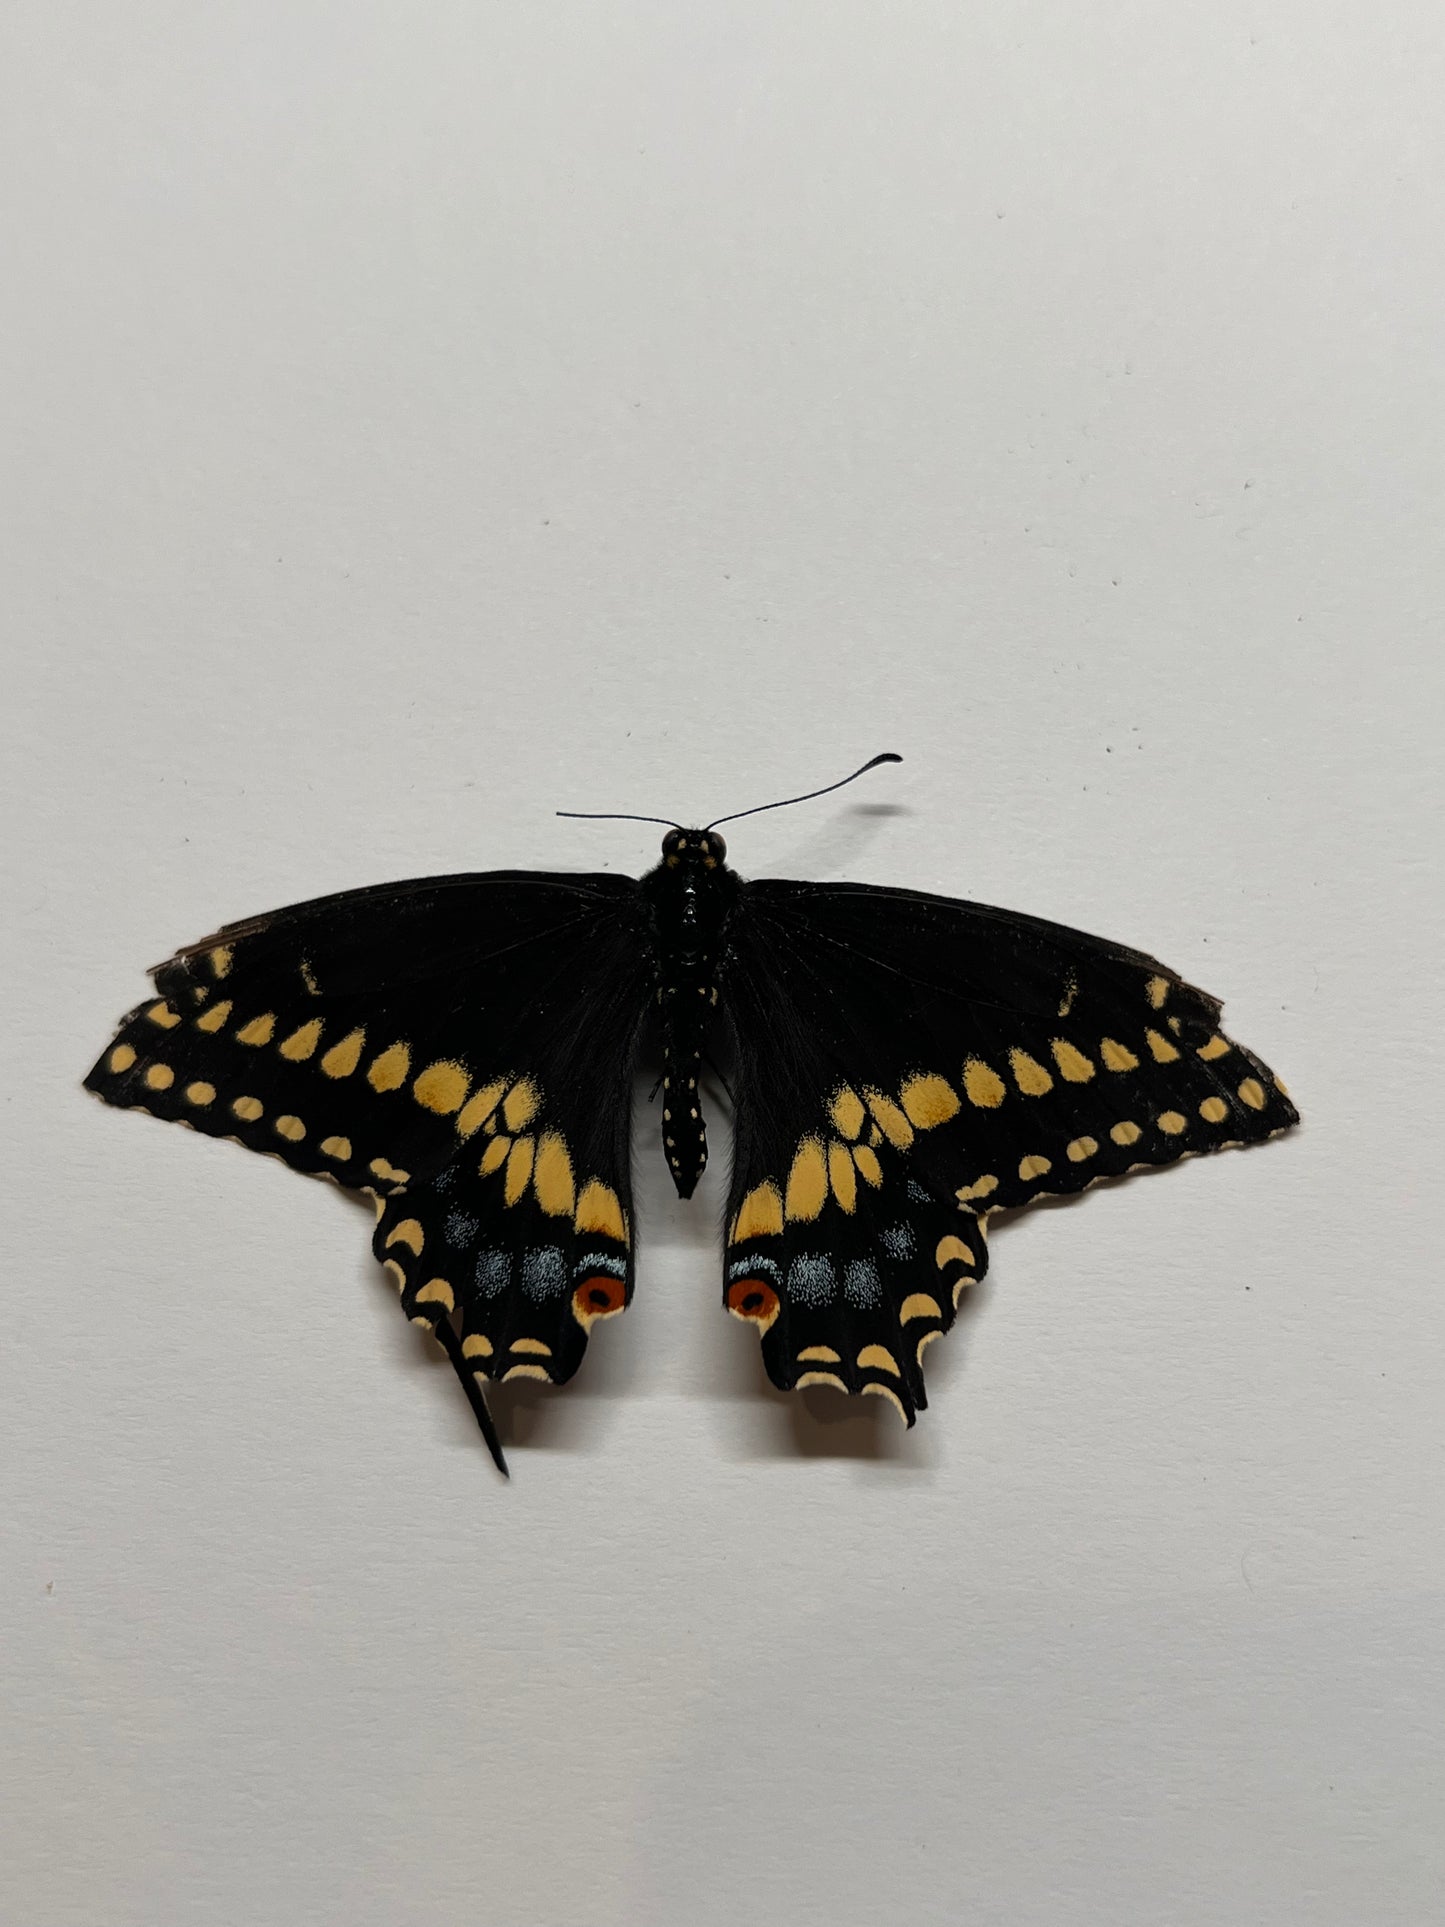 Black Swallowtail - Natural Death Papered Specimen